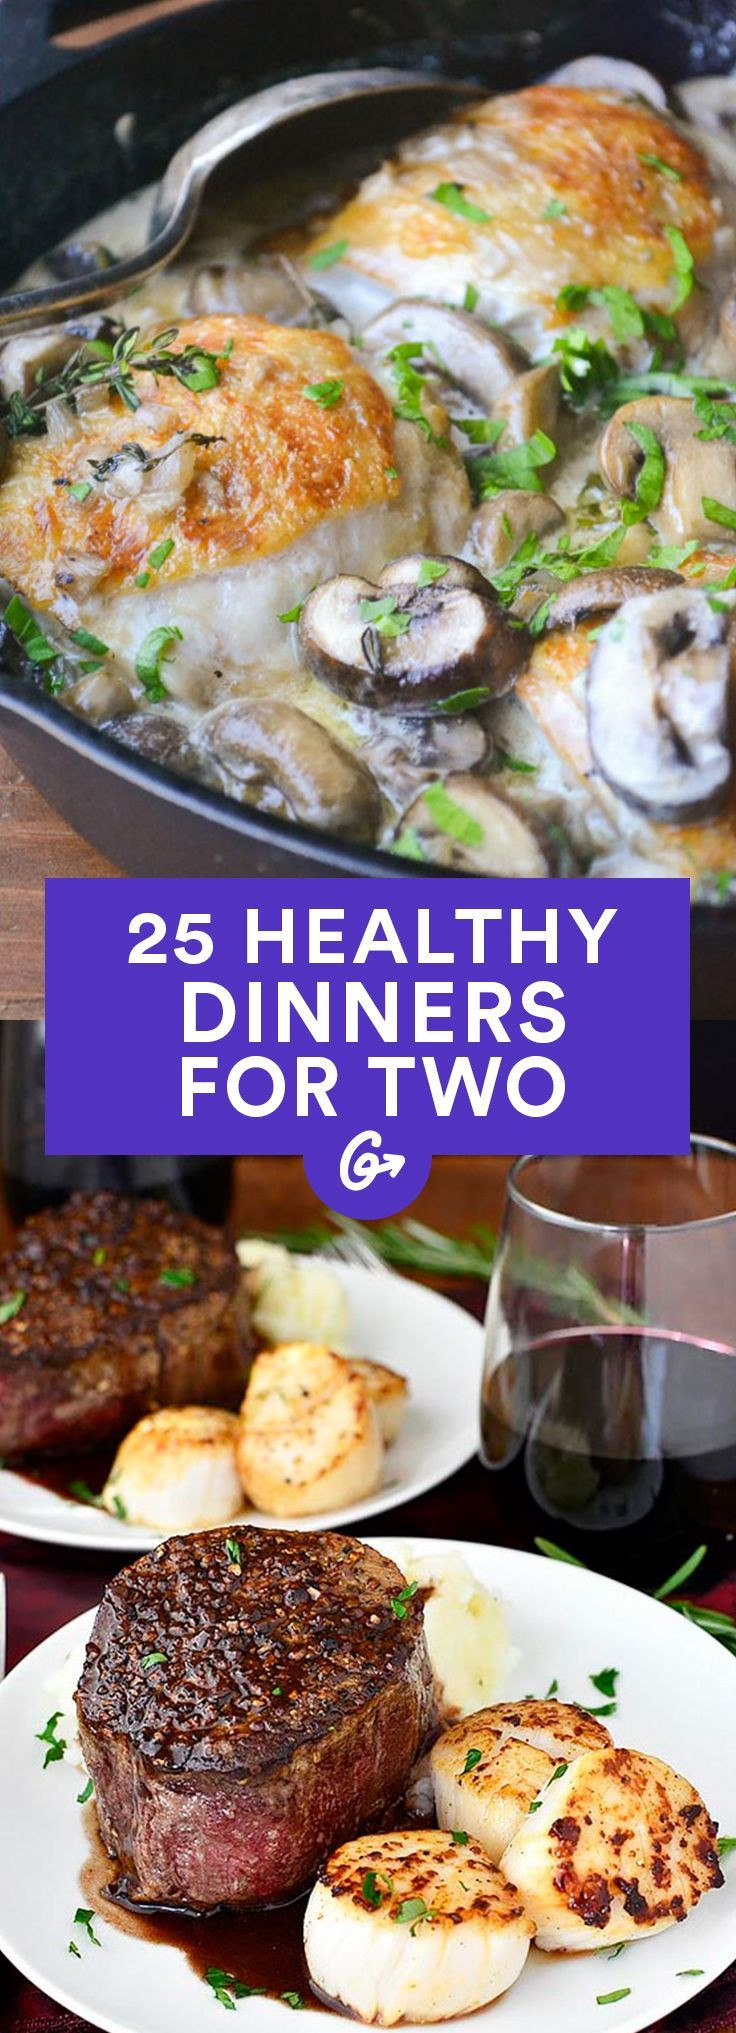 Healthy Dinners For Two On A Budget
 25 Healthy Dinner Recipes for Two